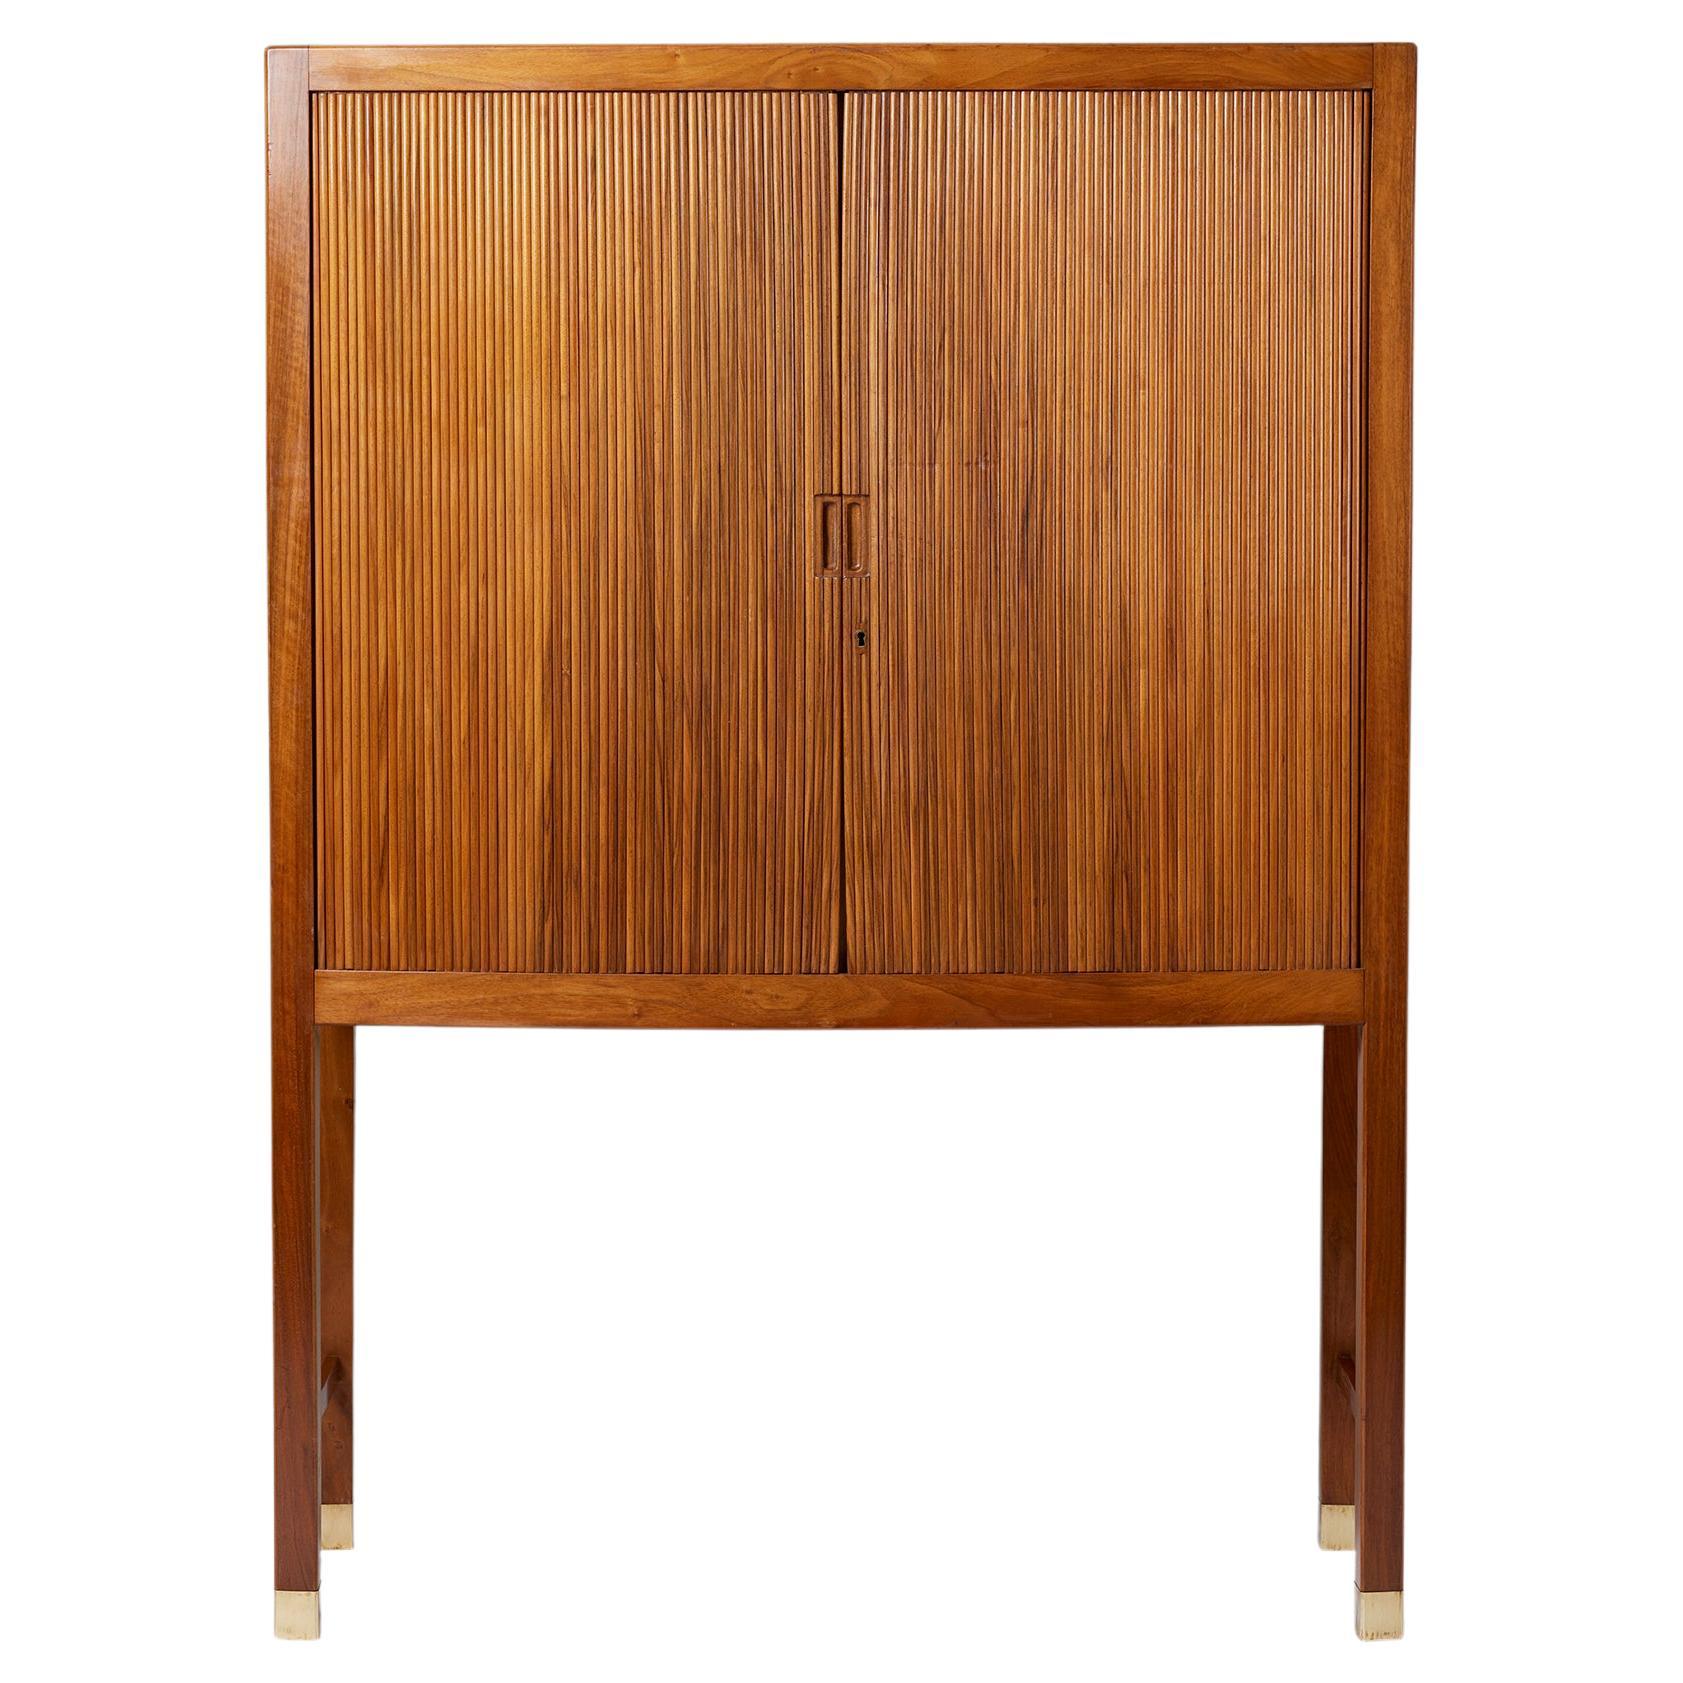 Cabinet with Tambour Doors Designed by a Danish Cabinetmaker, Denmark, 1950s